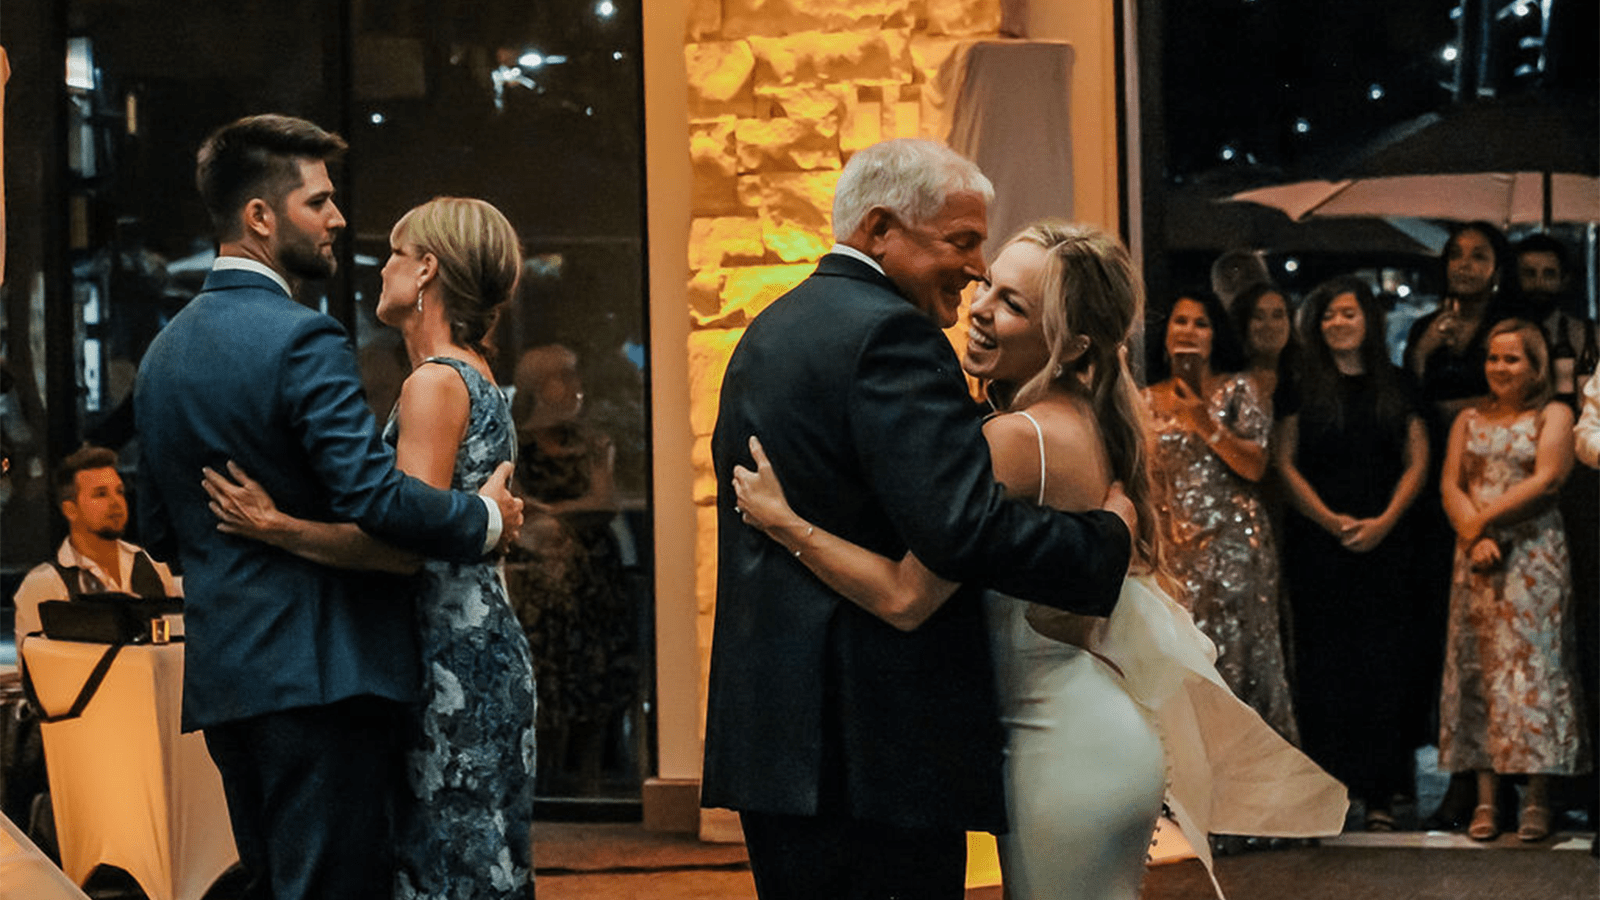 Bride and father dance under dimmed lighting in front of guests